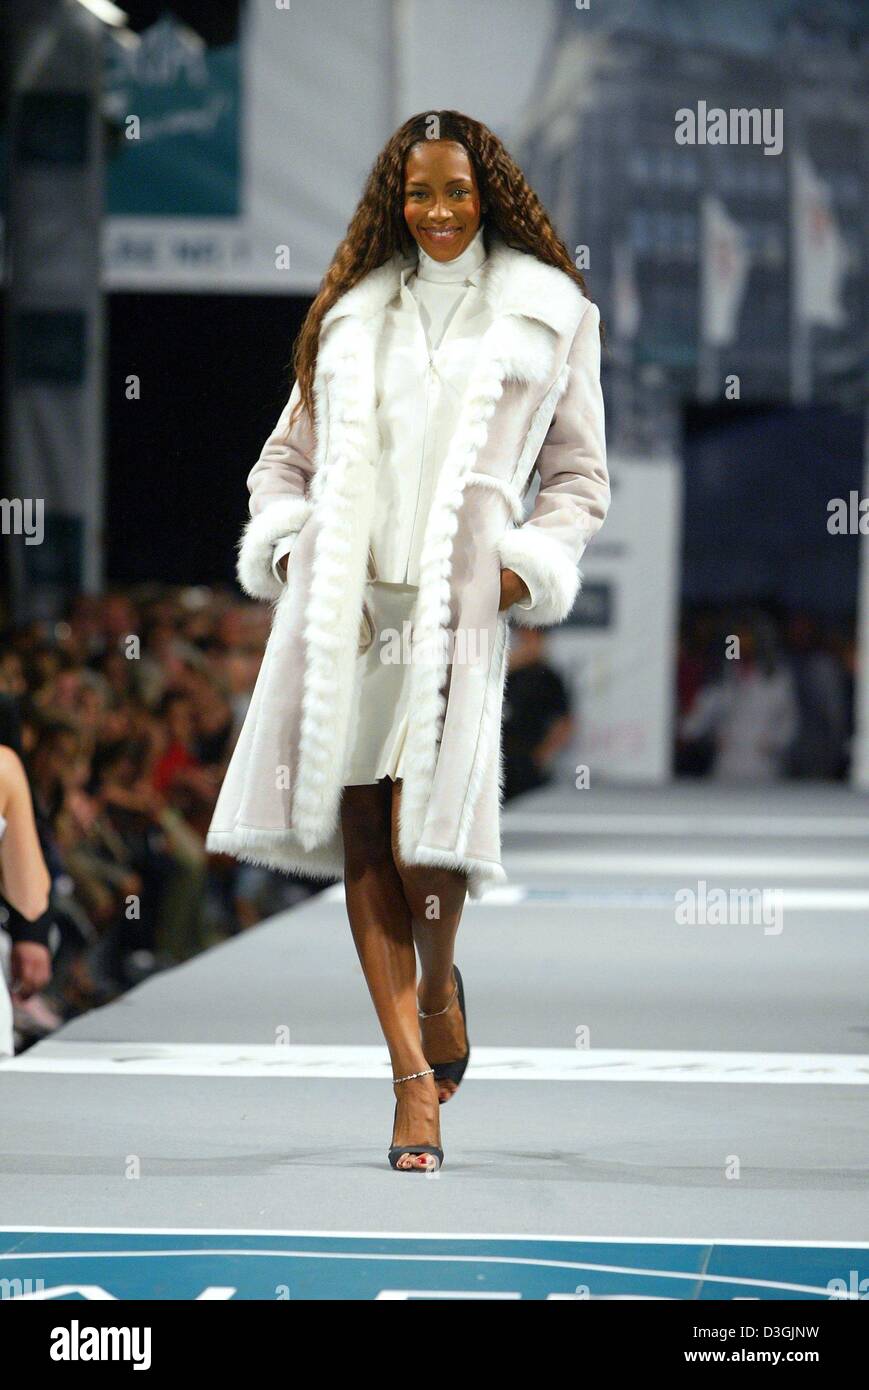 dpa) - British super model Naomi Campbell smiles and walks on the Stock  Photo - Alamy